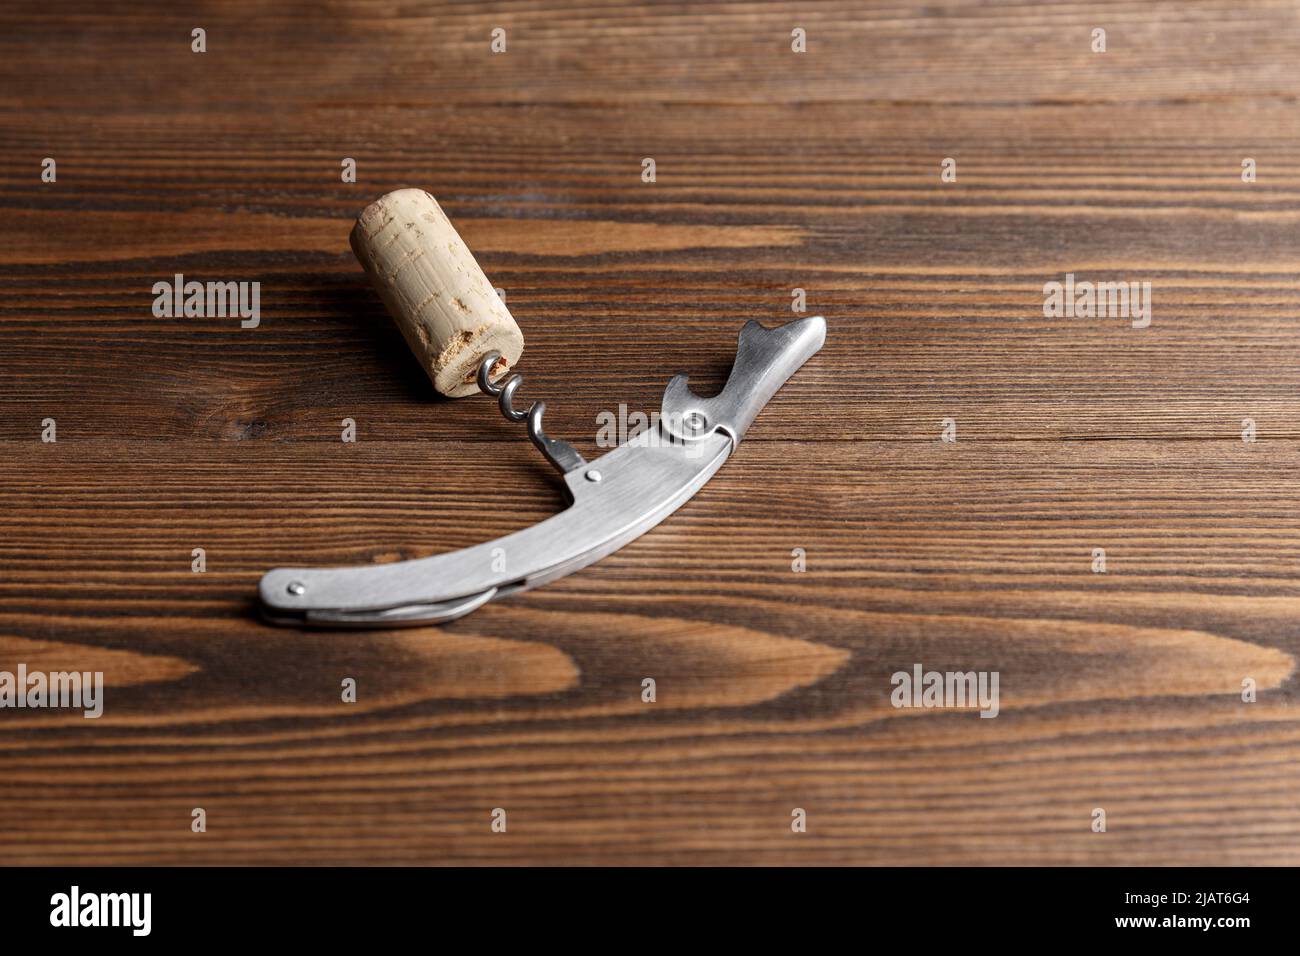 Stainless  wine corkscrew with a cork on a wooden background. Vine culture concept Stock Photo